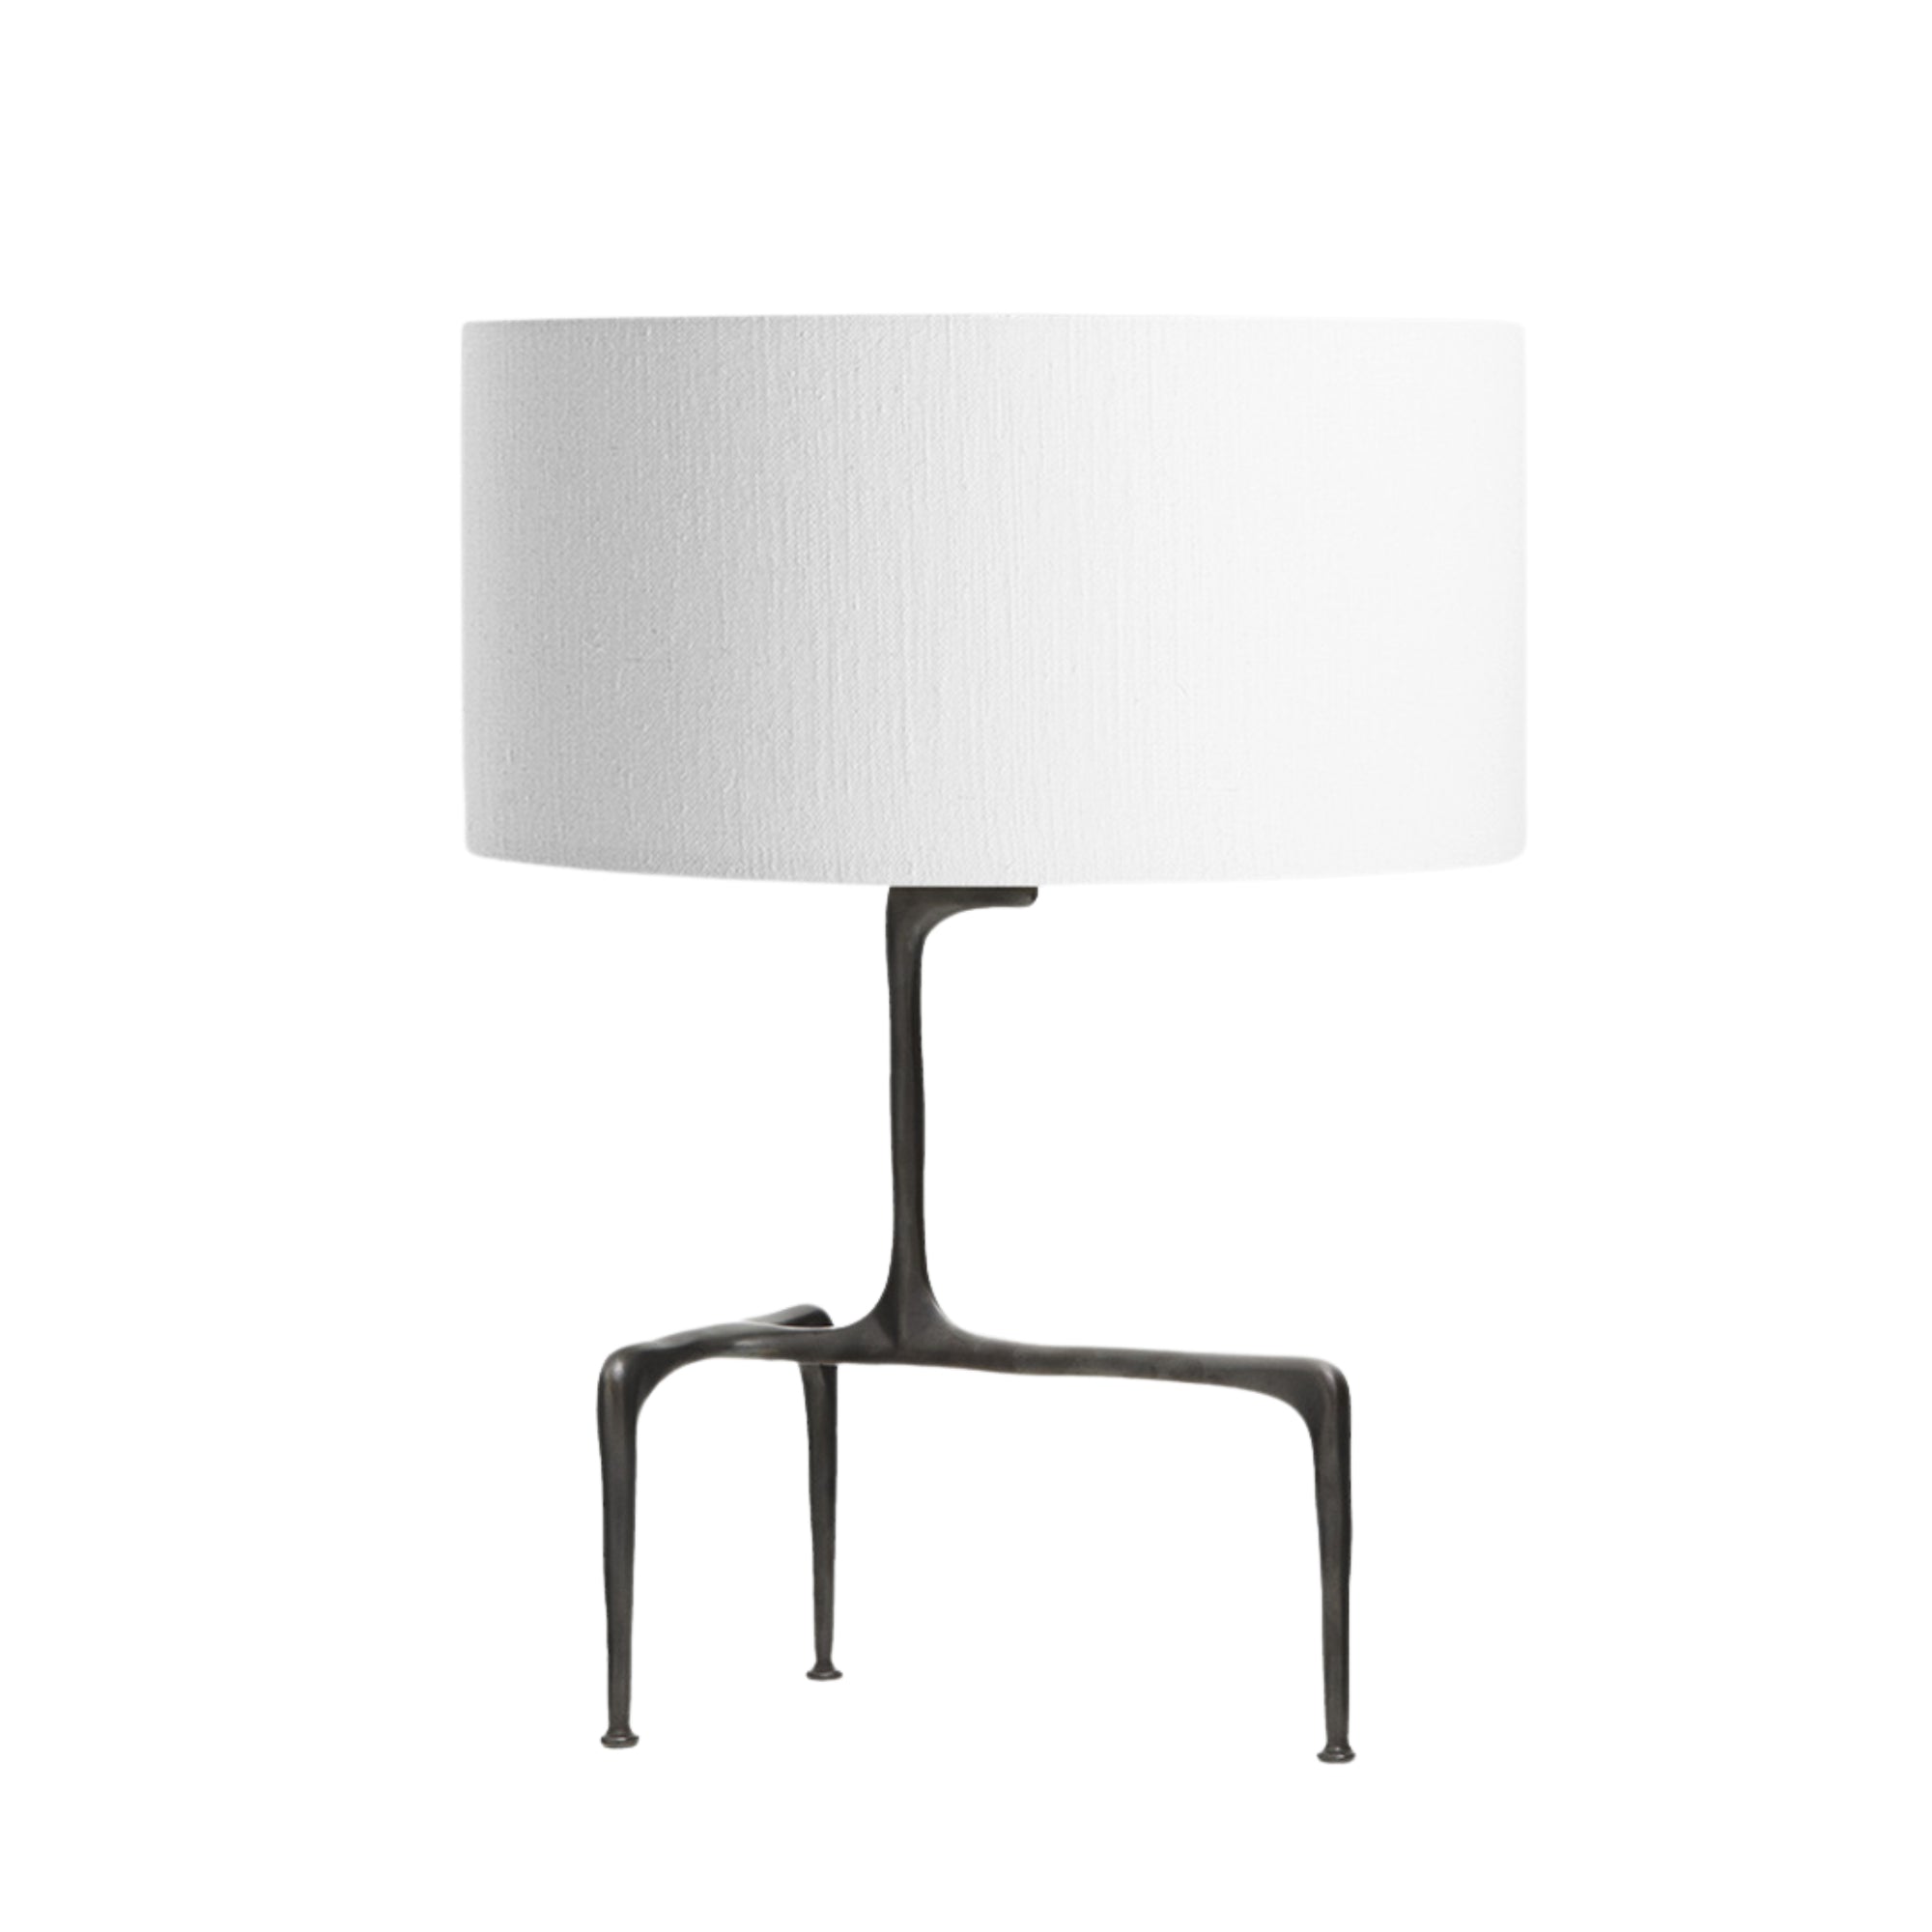 Braque Table Lamp - Bronze - THAT COOL LIVING